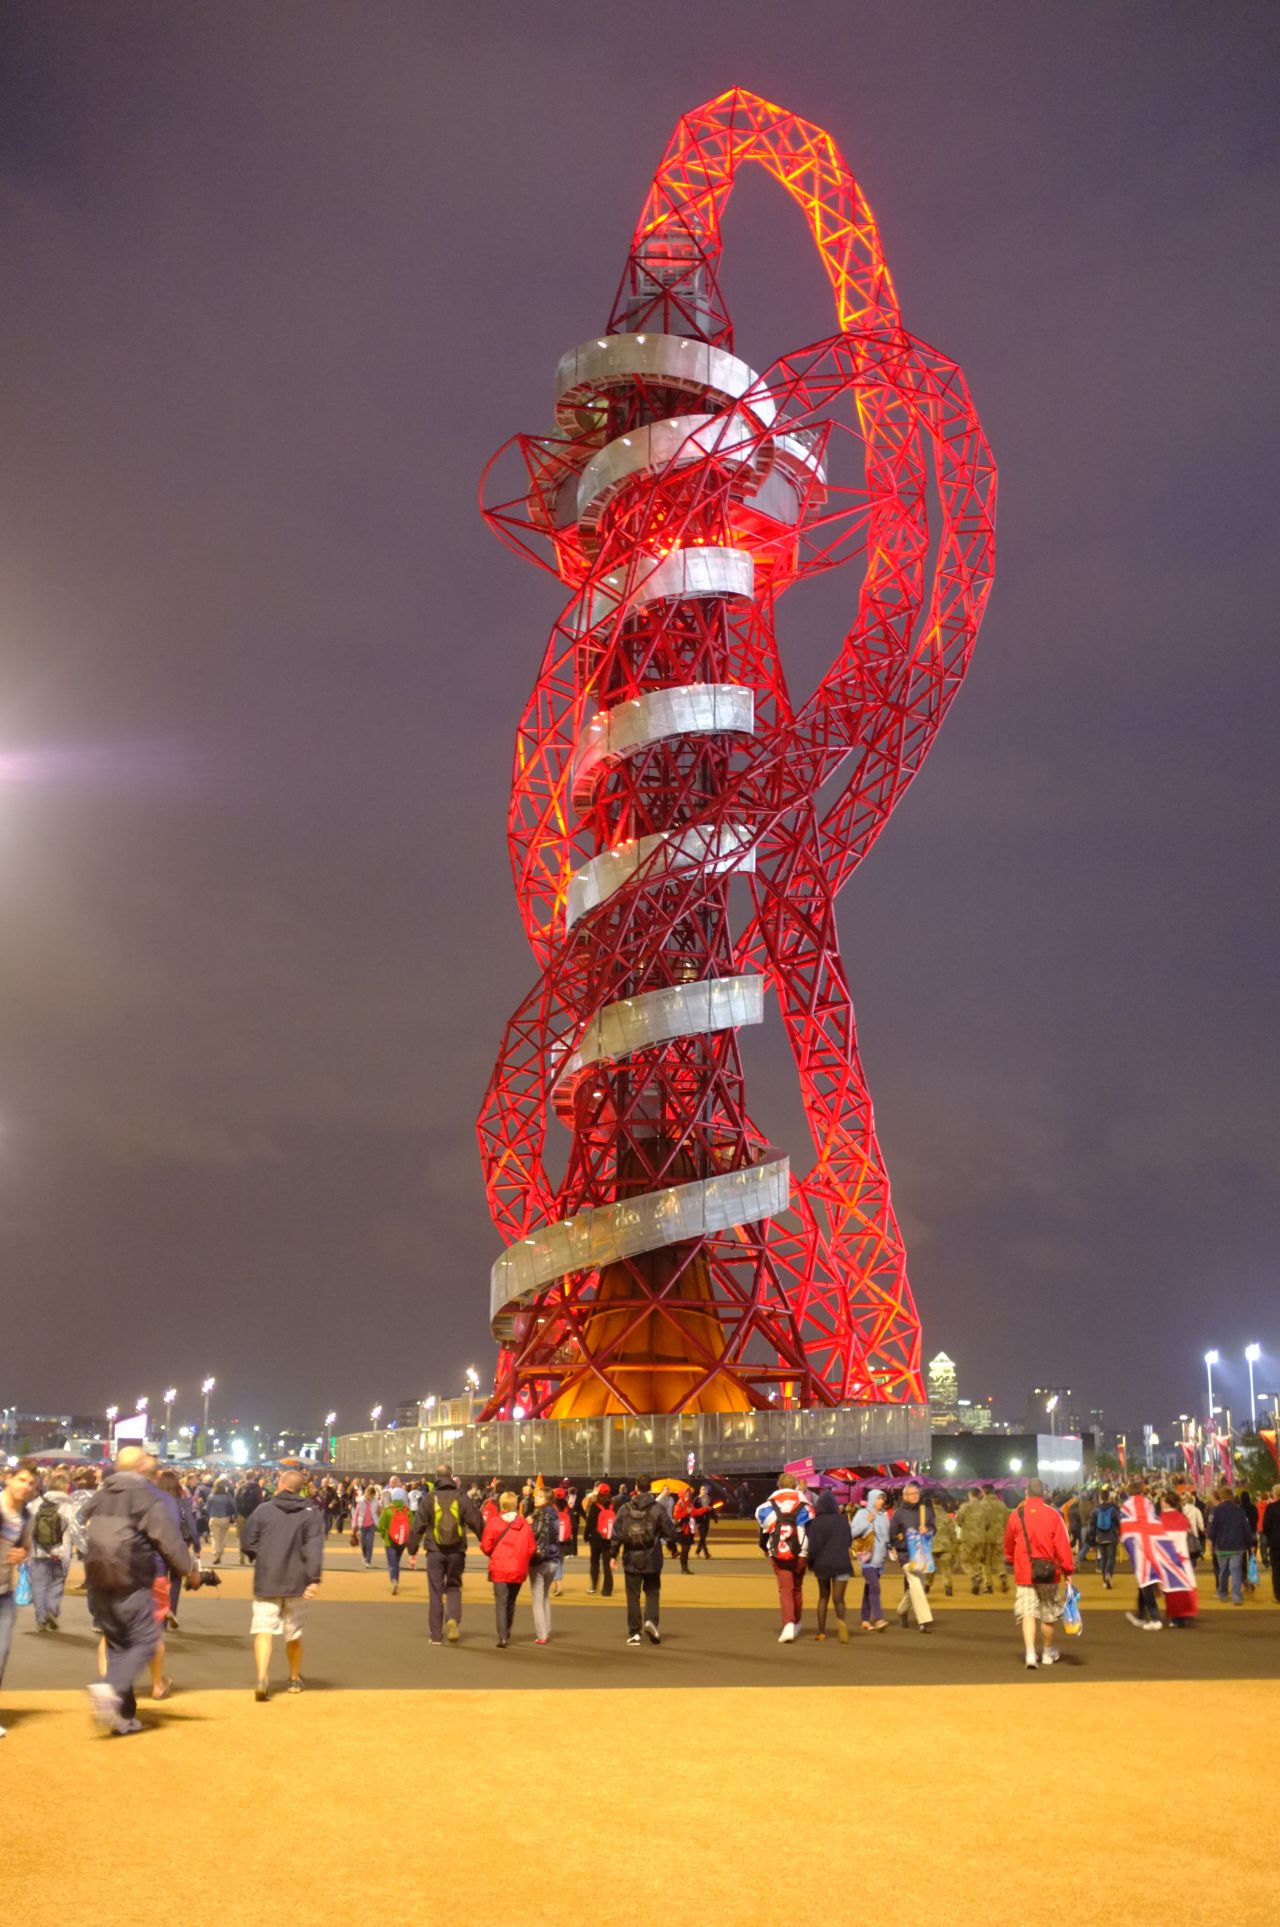 Anish Kapoor's "Orbit Tower," a permanent artwork and the tallest art structure in Britain, attracted many of my fellow stragglers, its vivid red form illuminated brightly against the sky. 